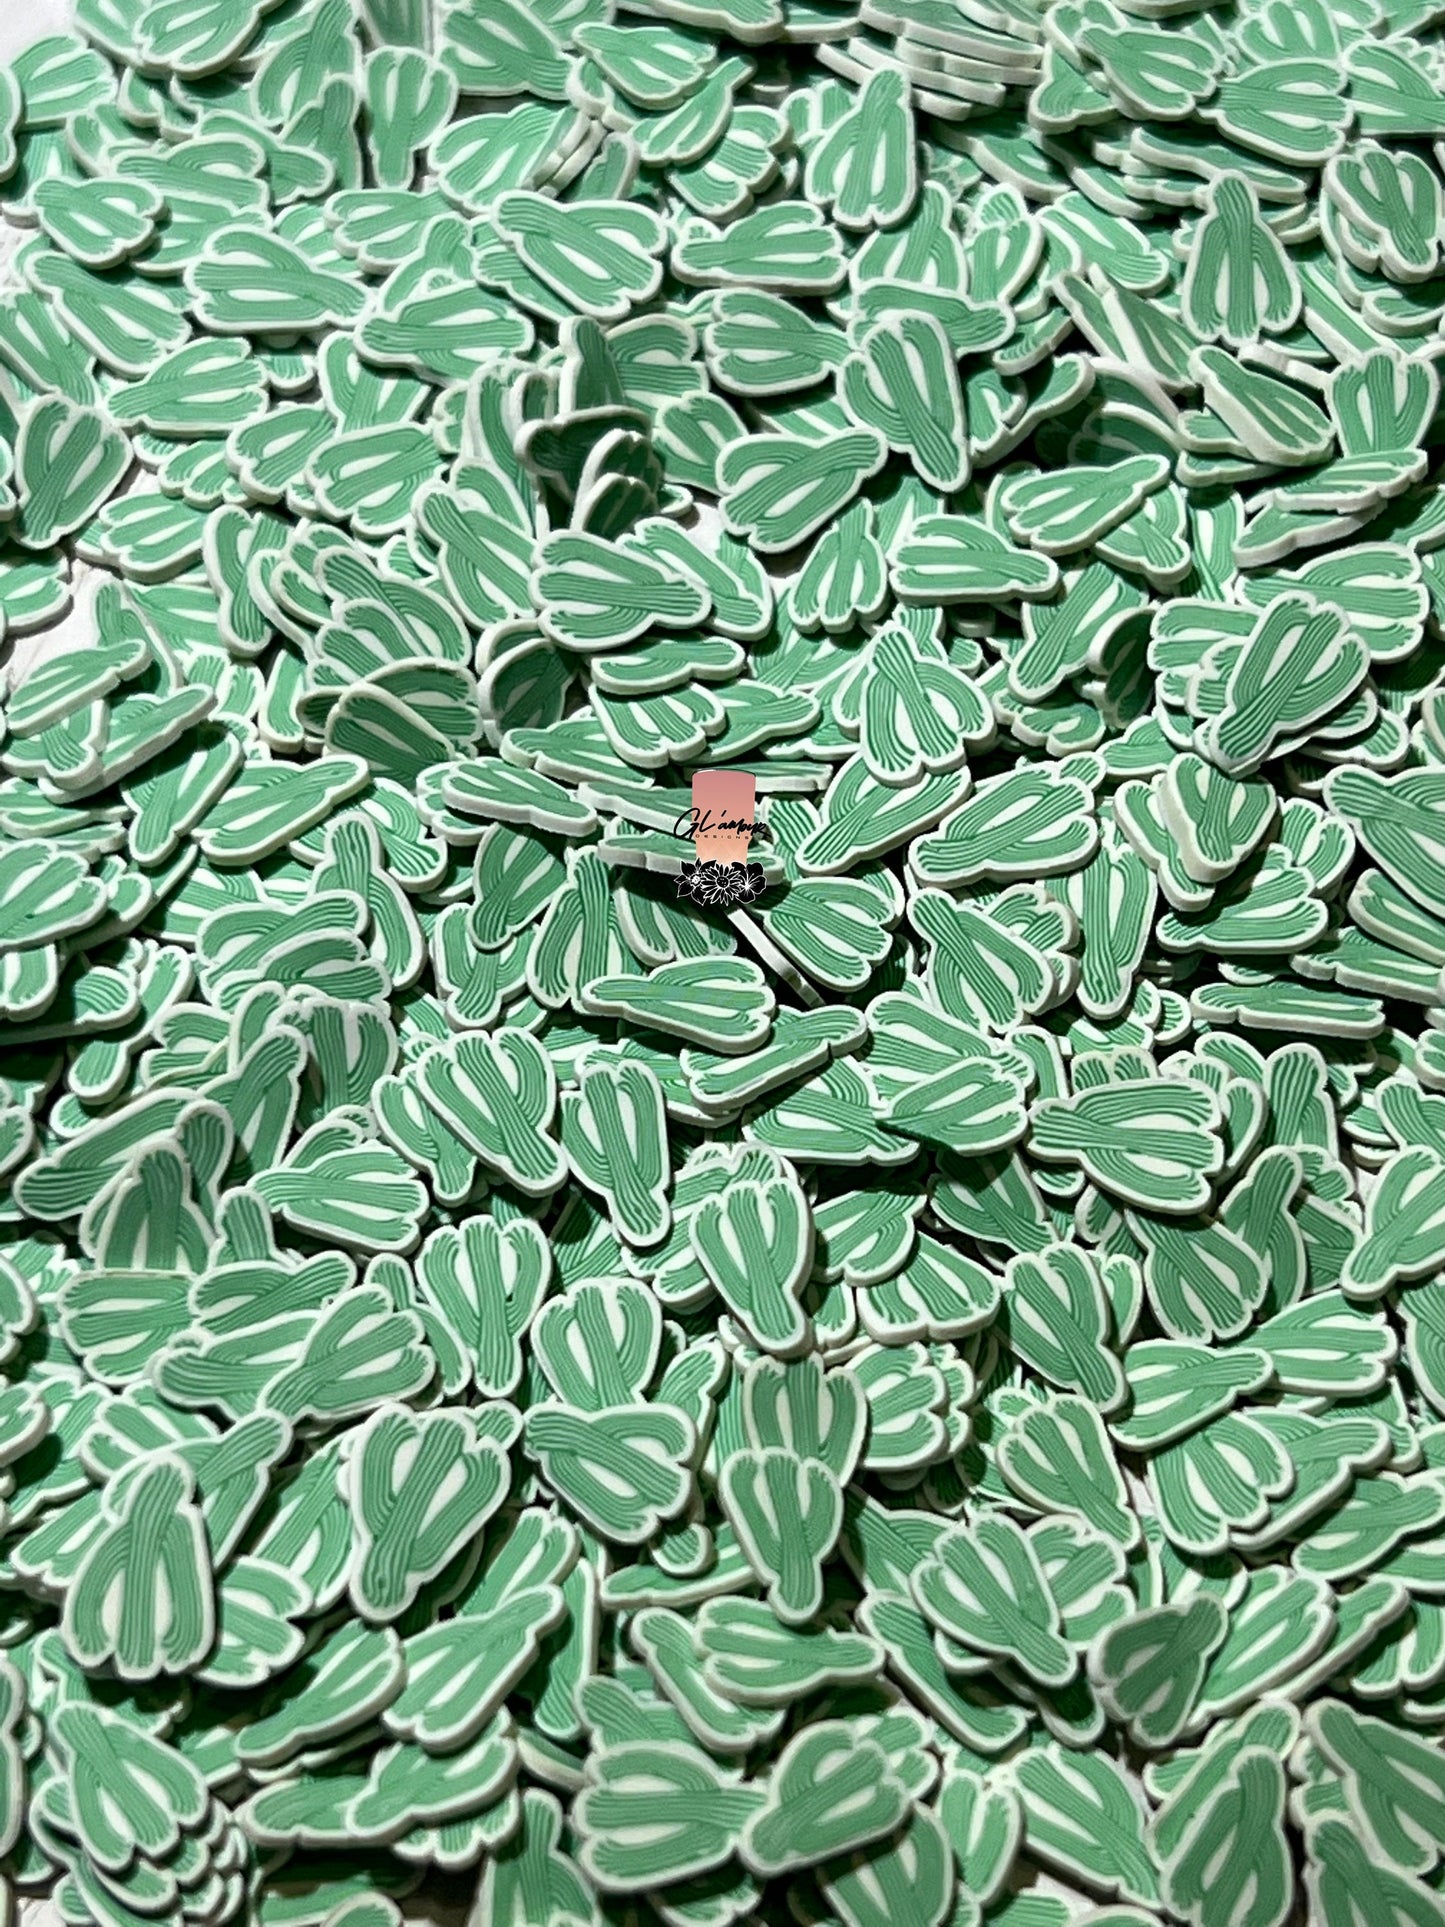 Cactus Polymer Slices - small 5mm